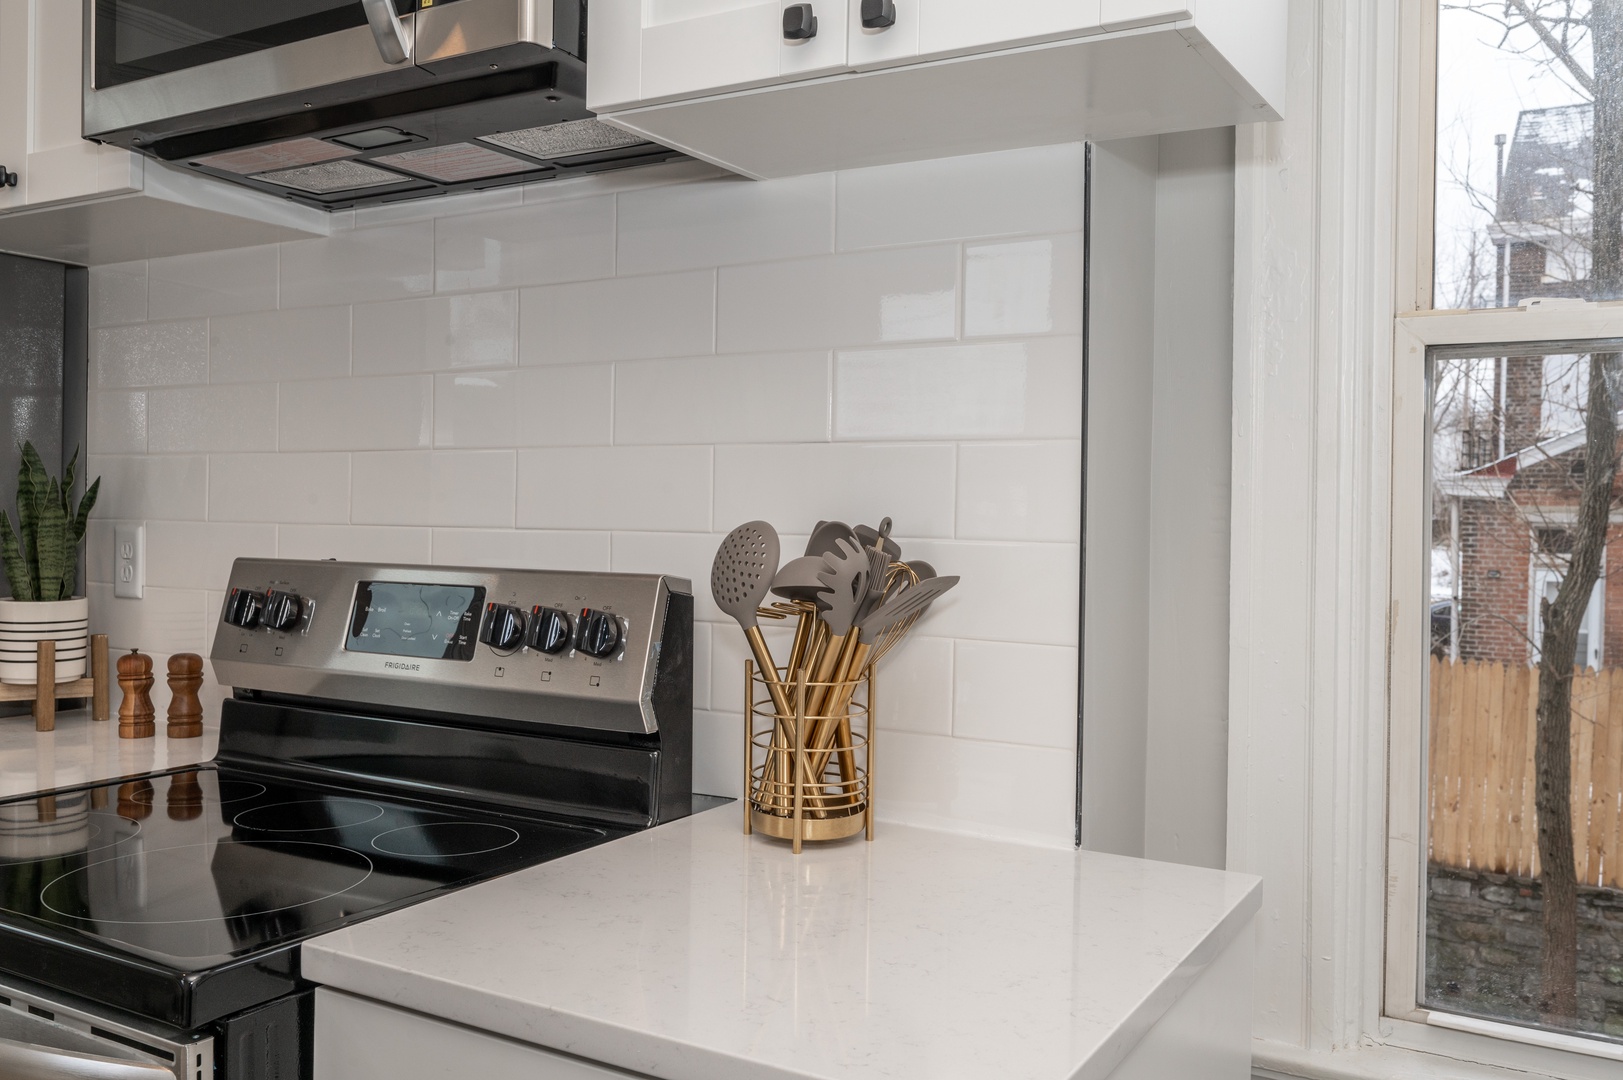 Apt 2 – The eat-in kitchen offers ample space & all the comforts of home